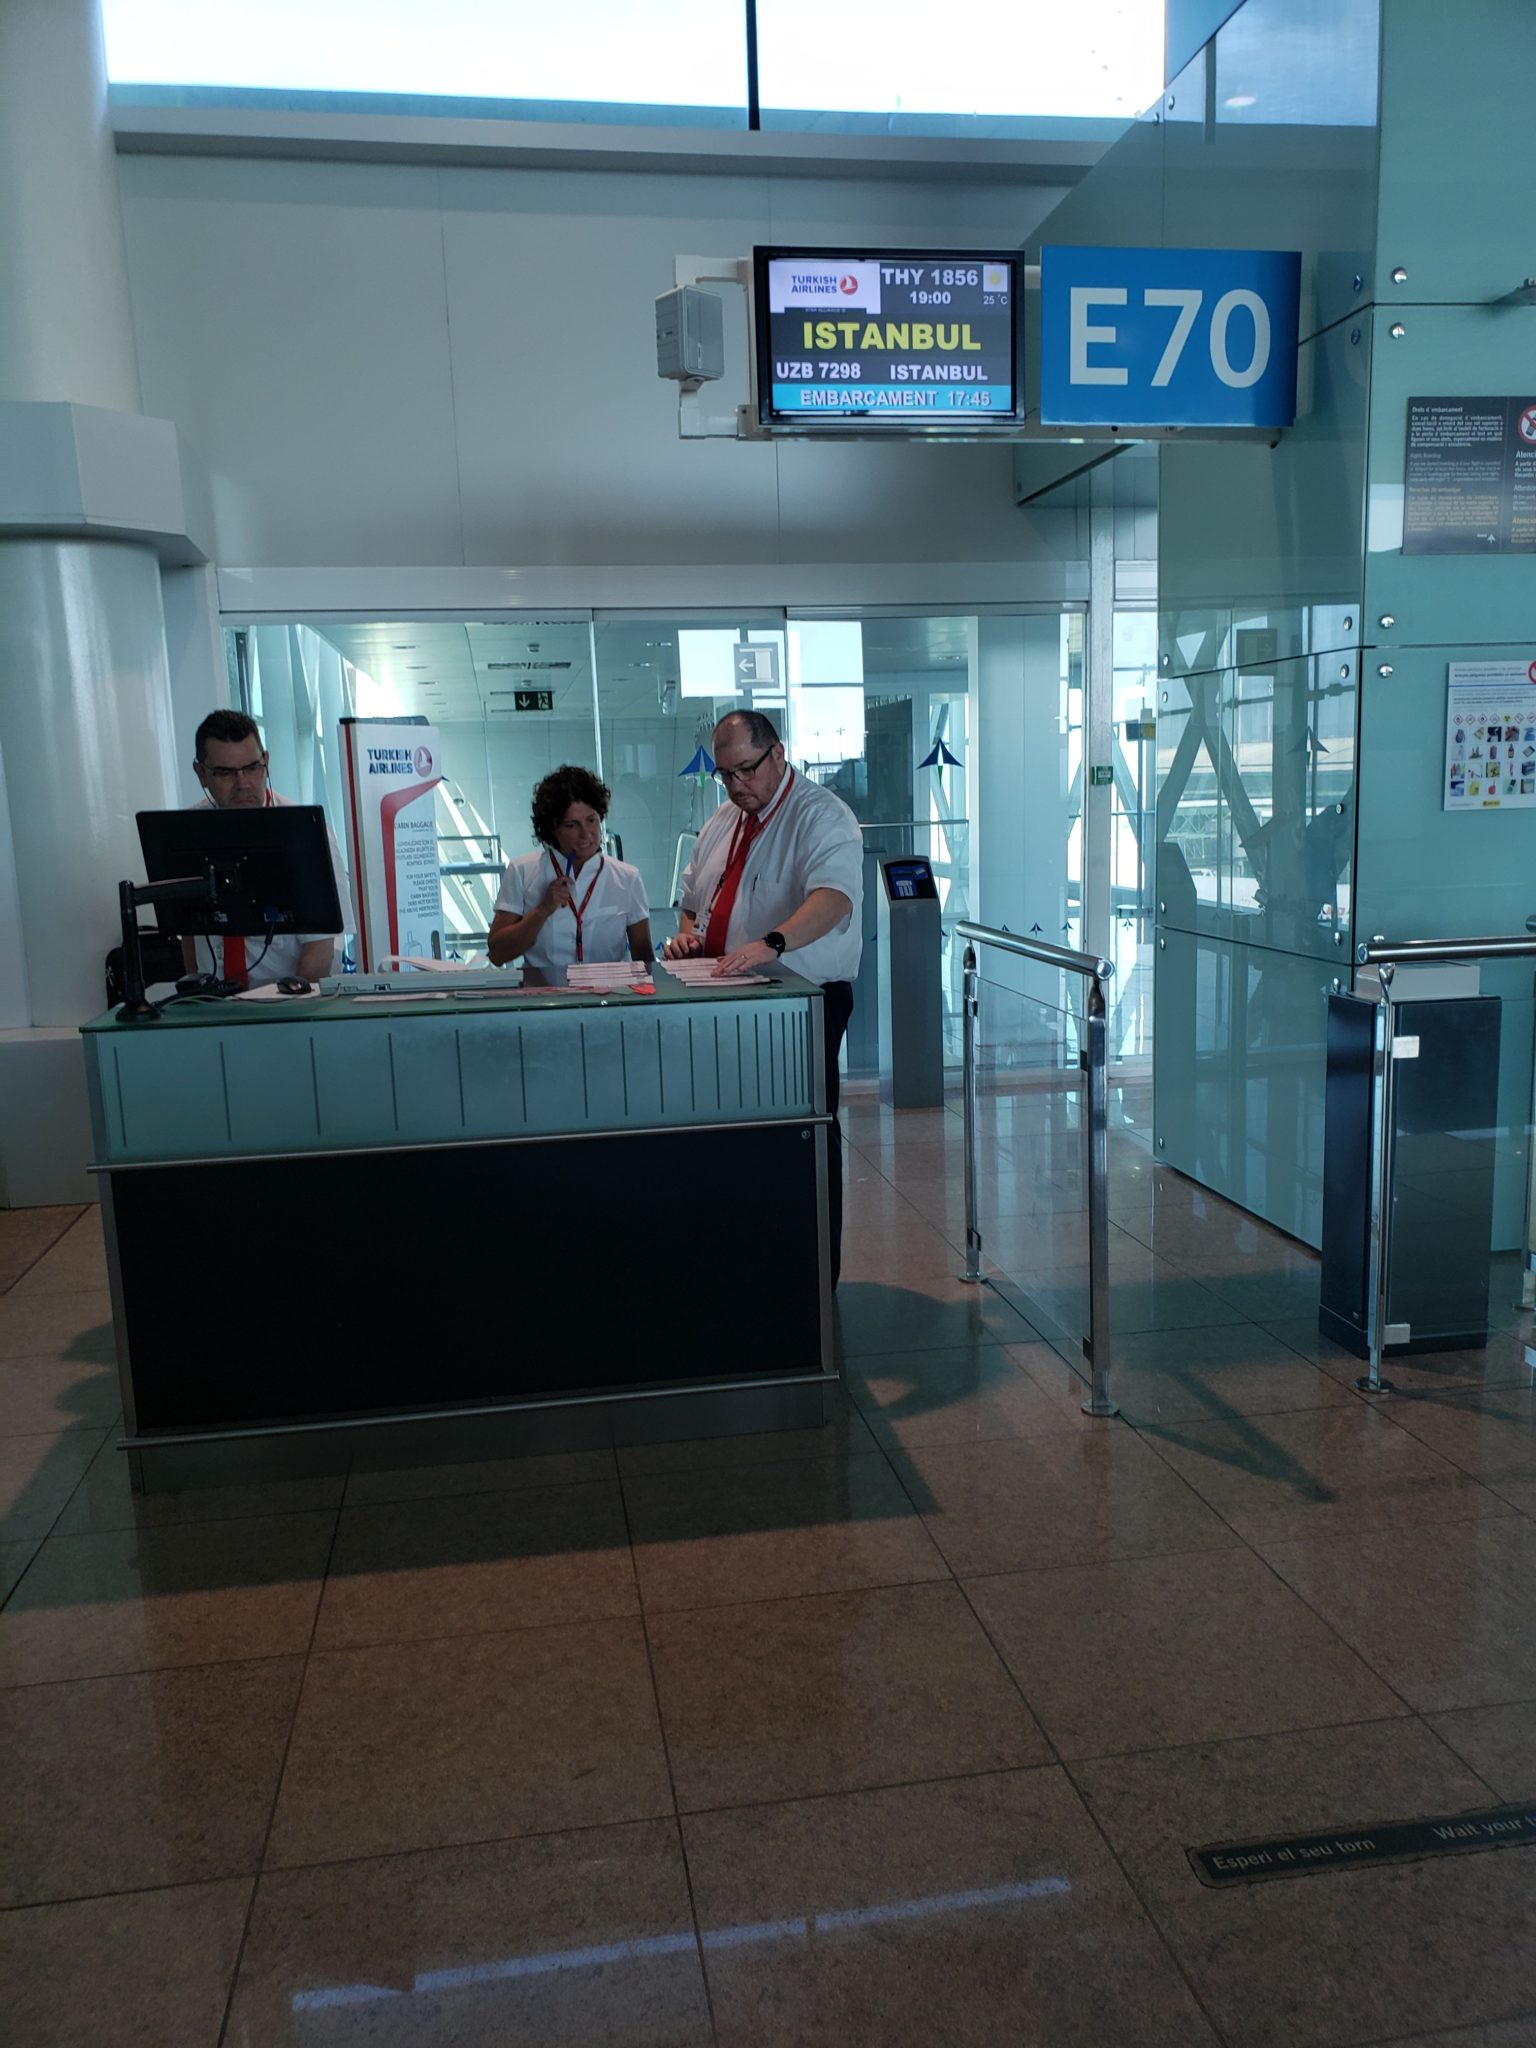 a man and woman at a desk in a airport